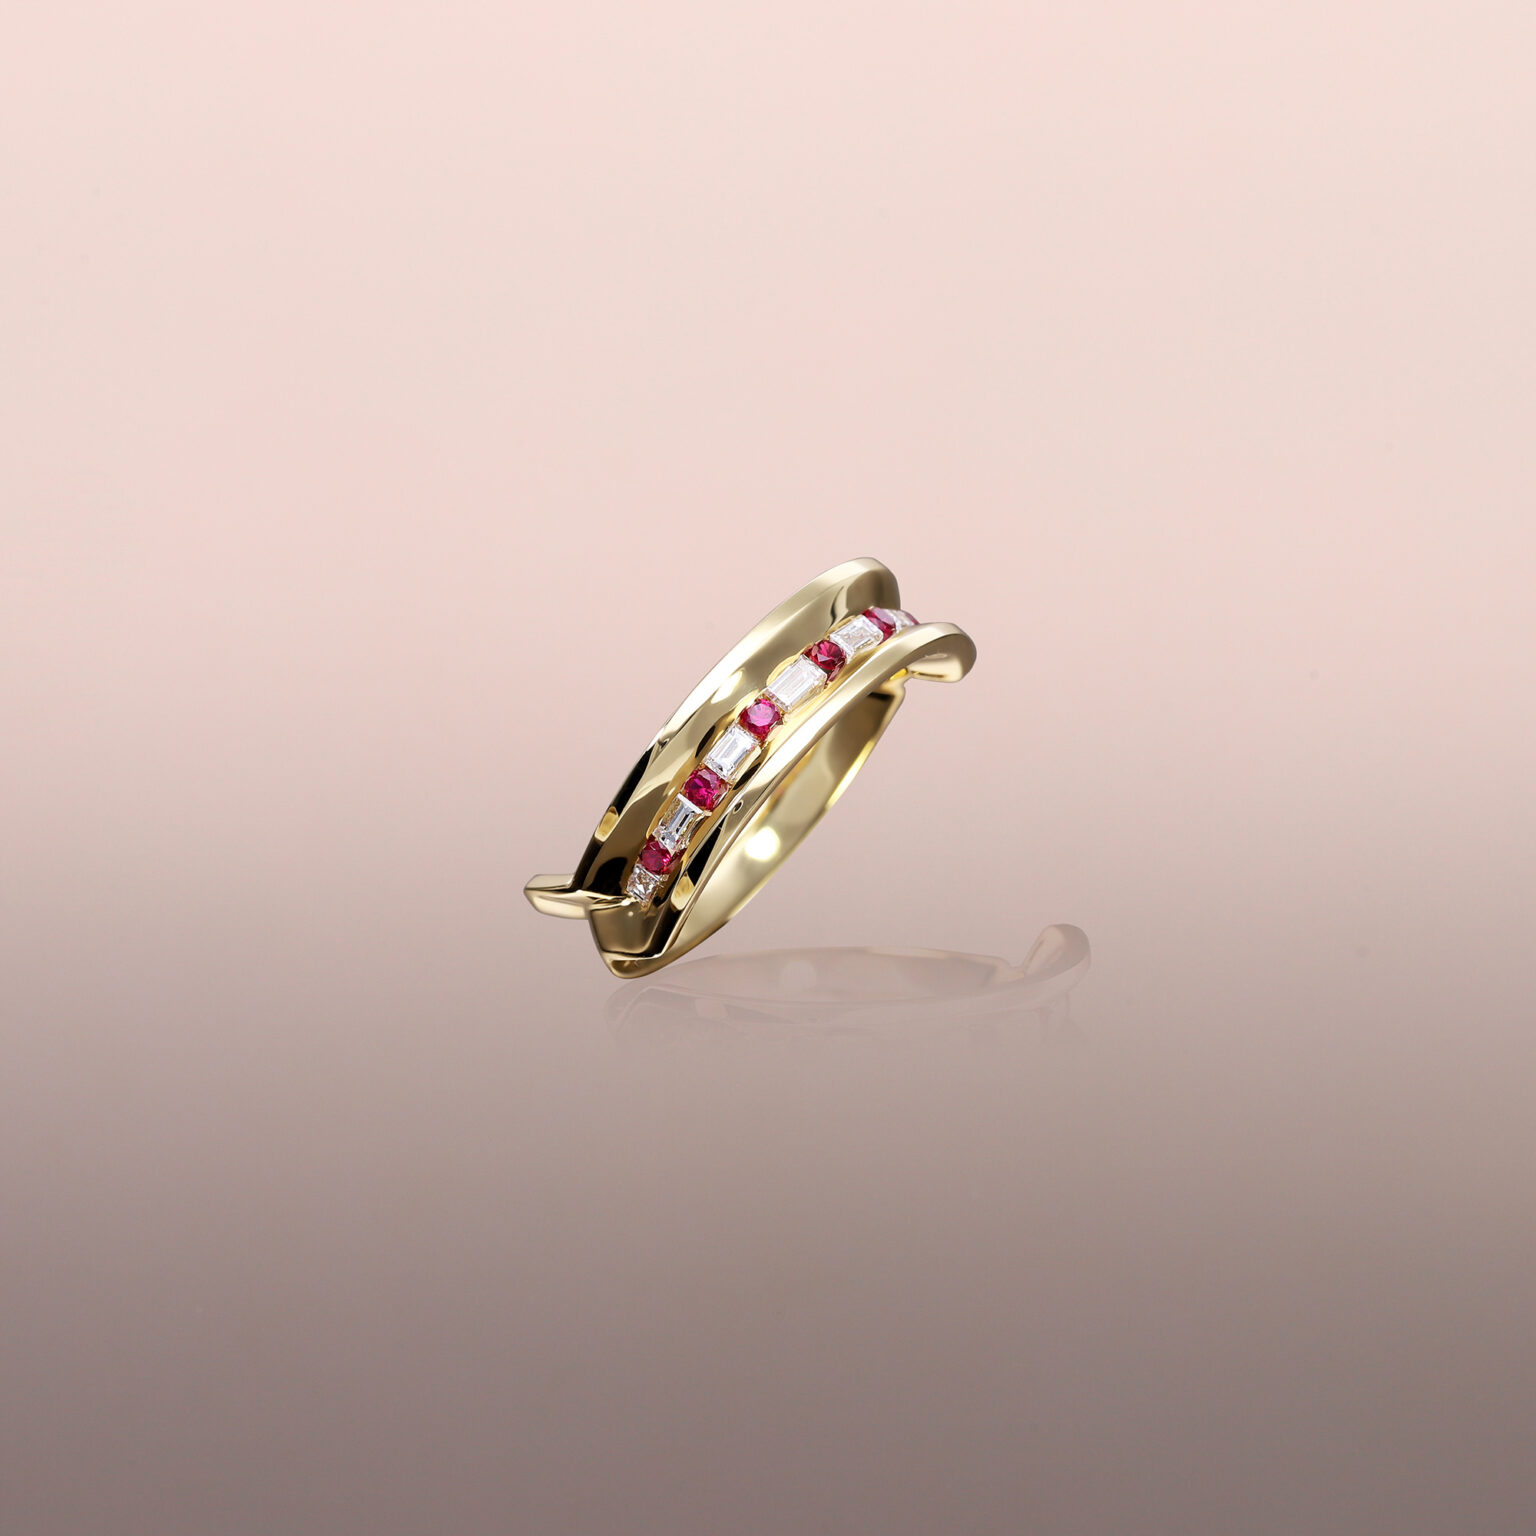 Galactic ruby and diamond ring